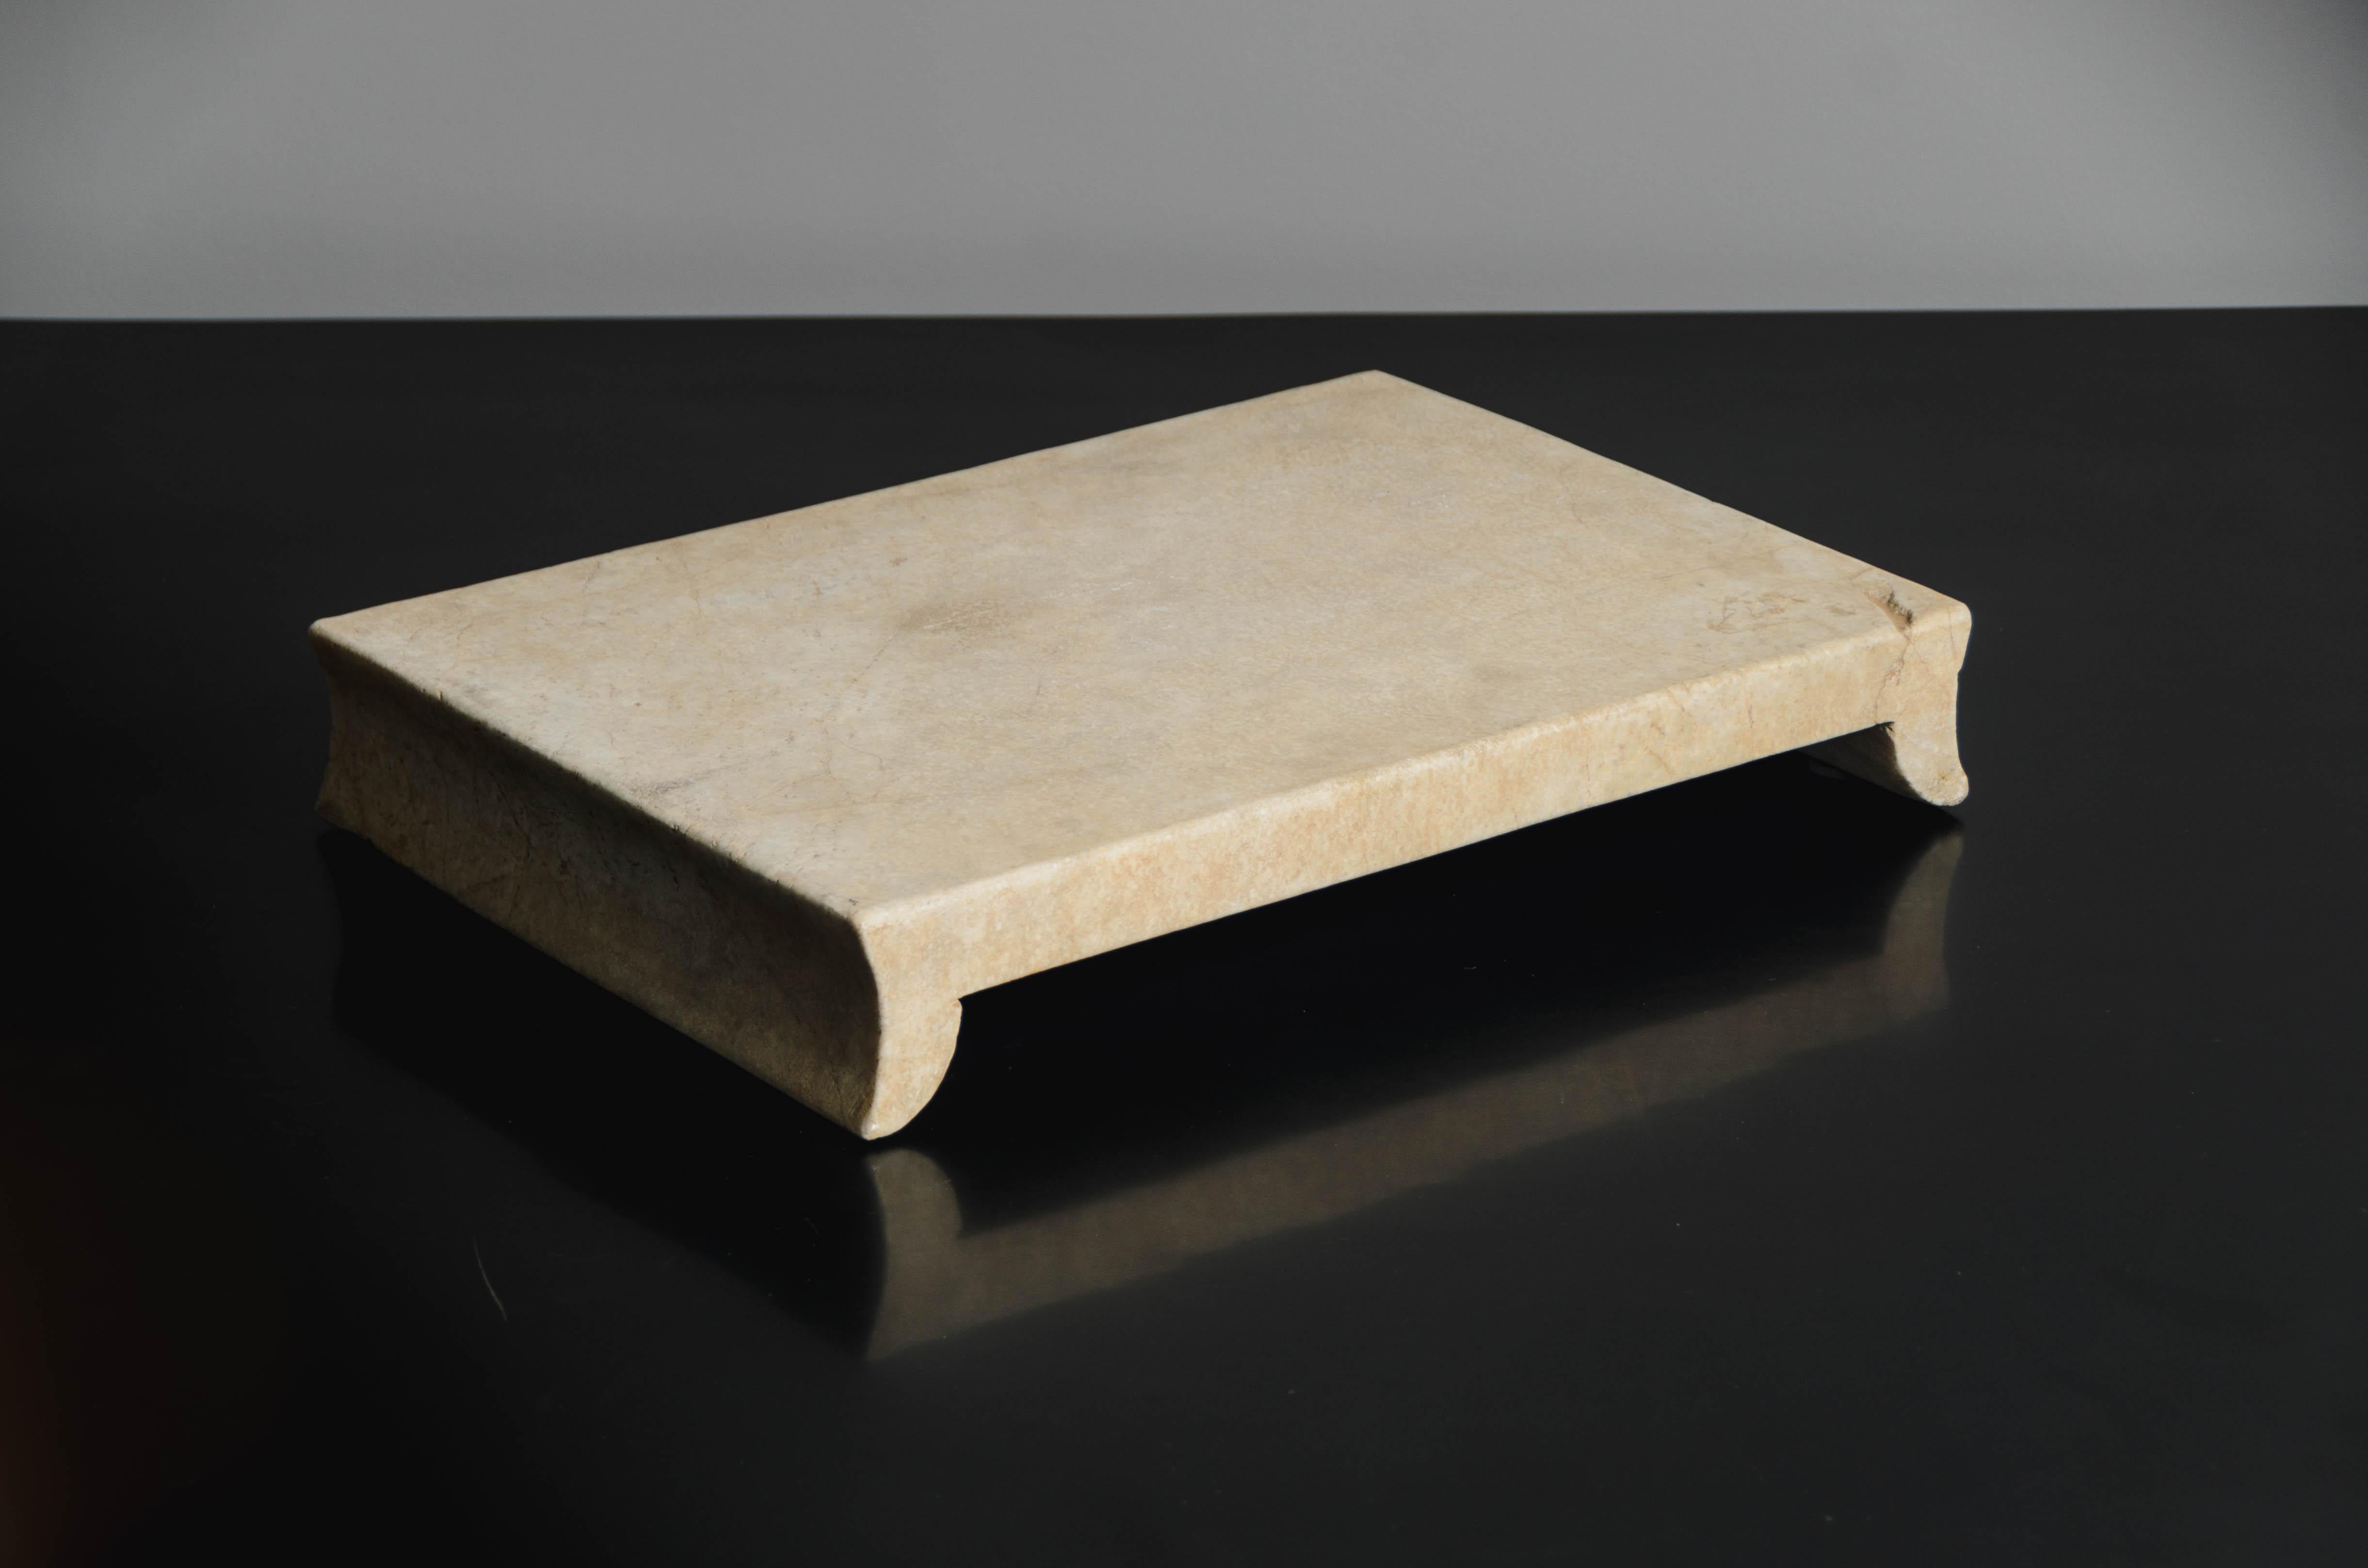 Hand-Carved Han Bai Yu Stone Elevated Tray by Robert Kuo, Hand Carved, Limited Edition For Sale